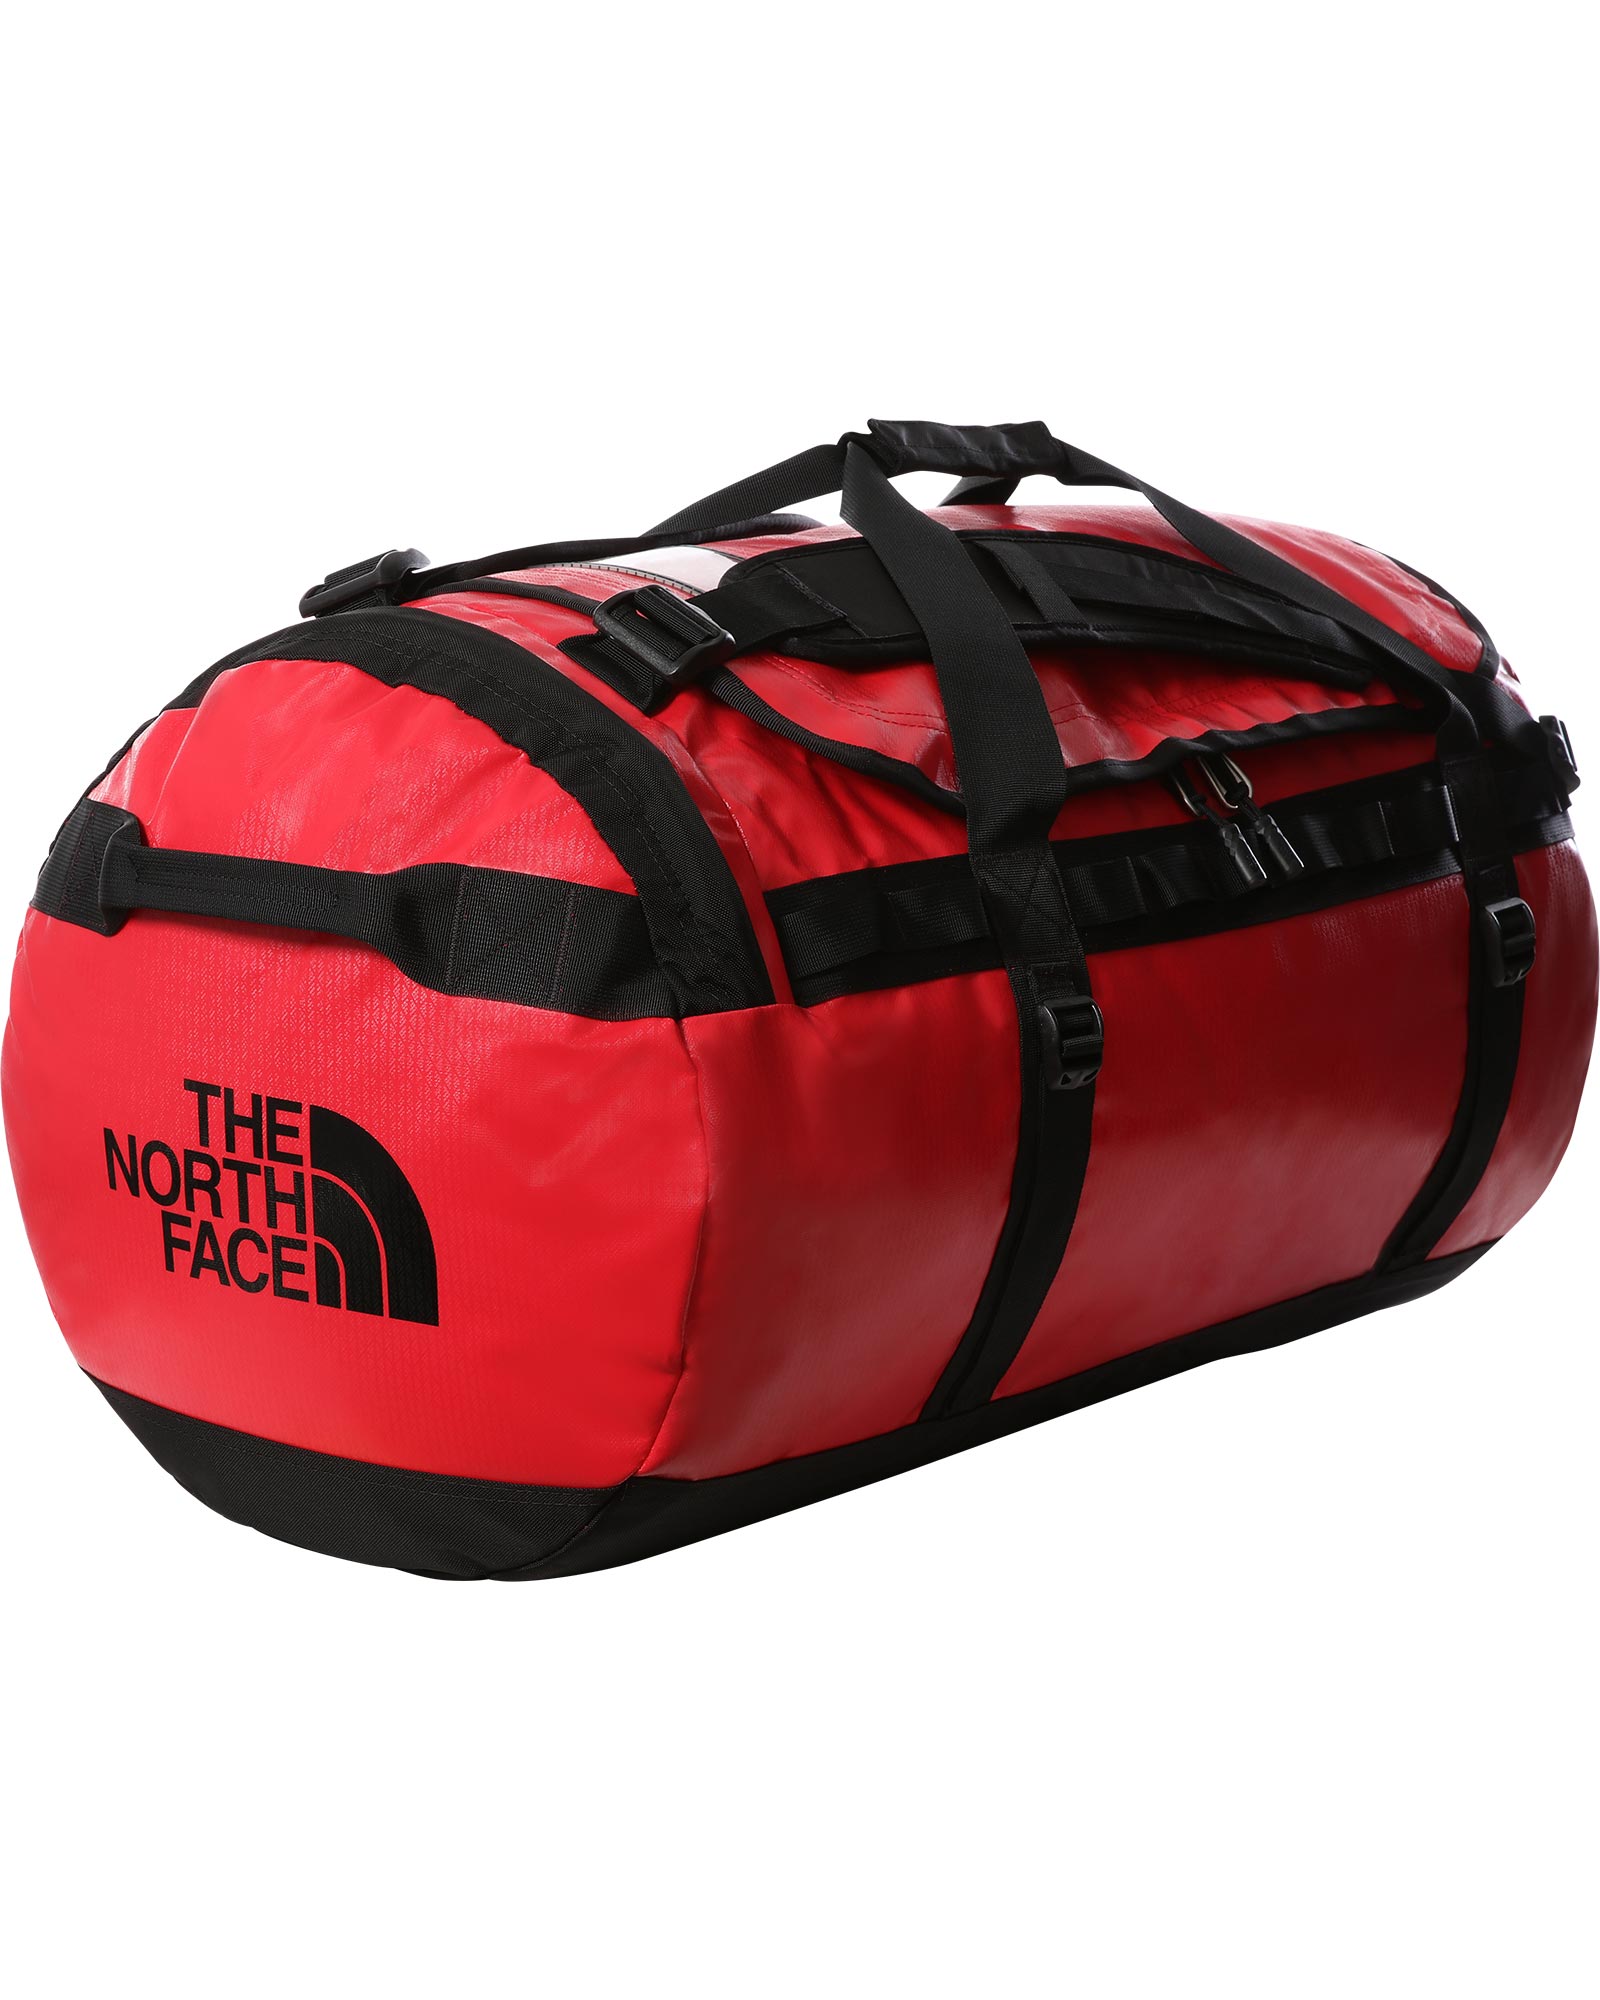 The North Face Base Camp Duffel Large 95L - TNF Red/TNF Black